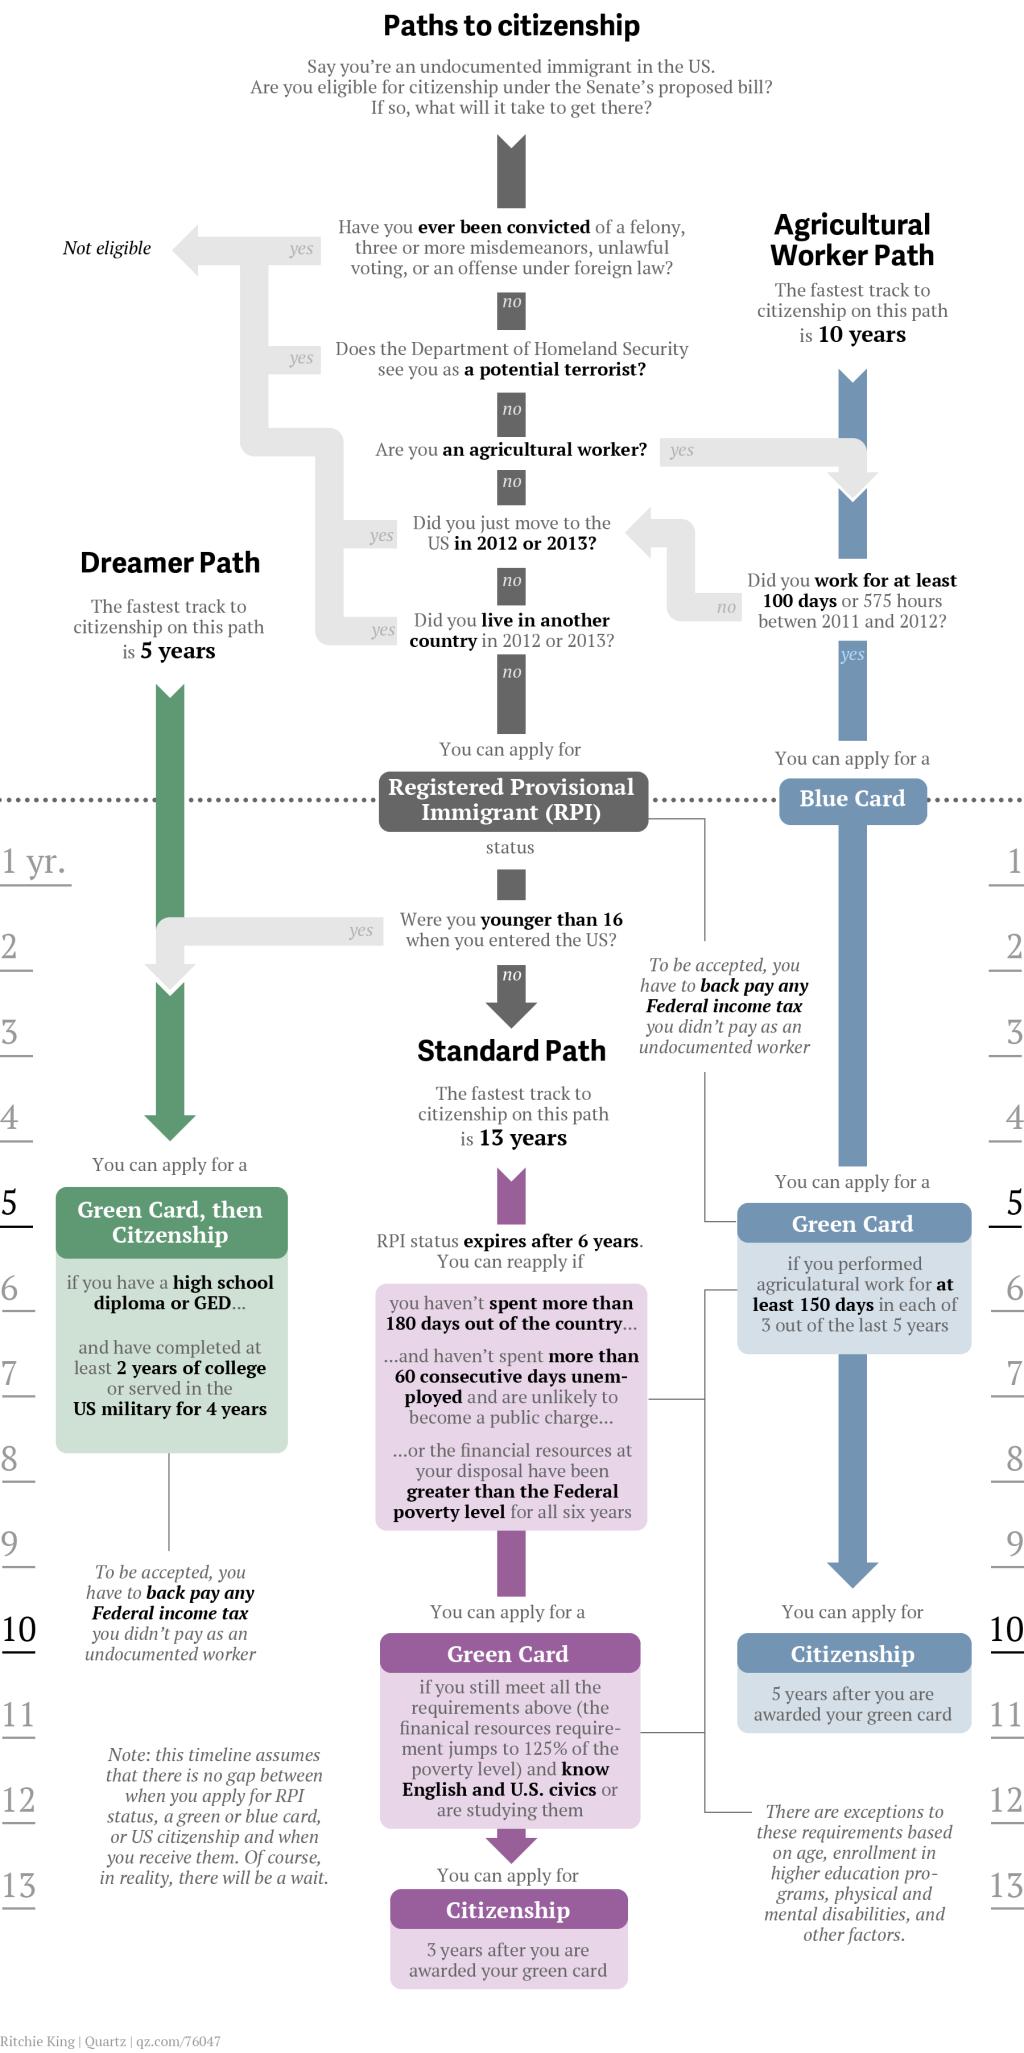 Path to citizenship, visualized.